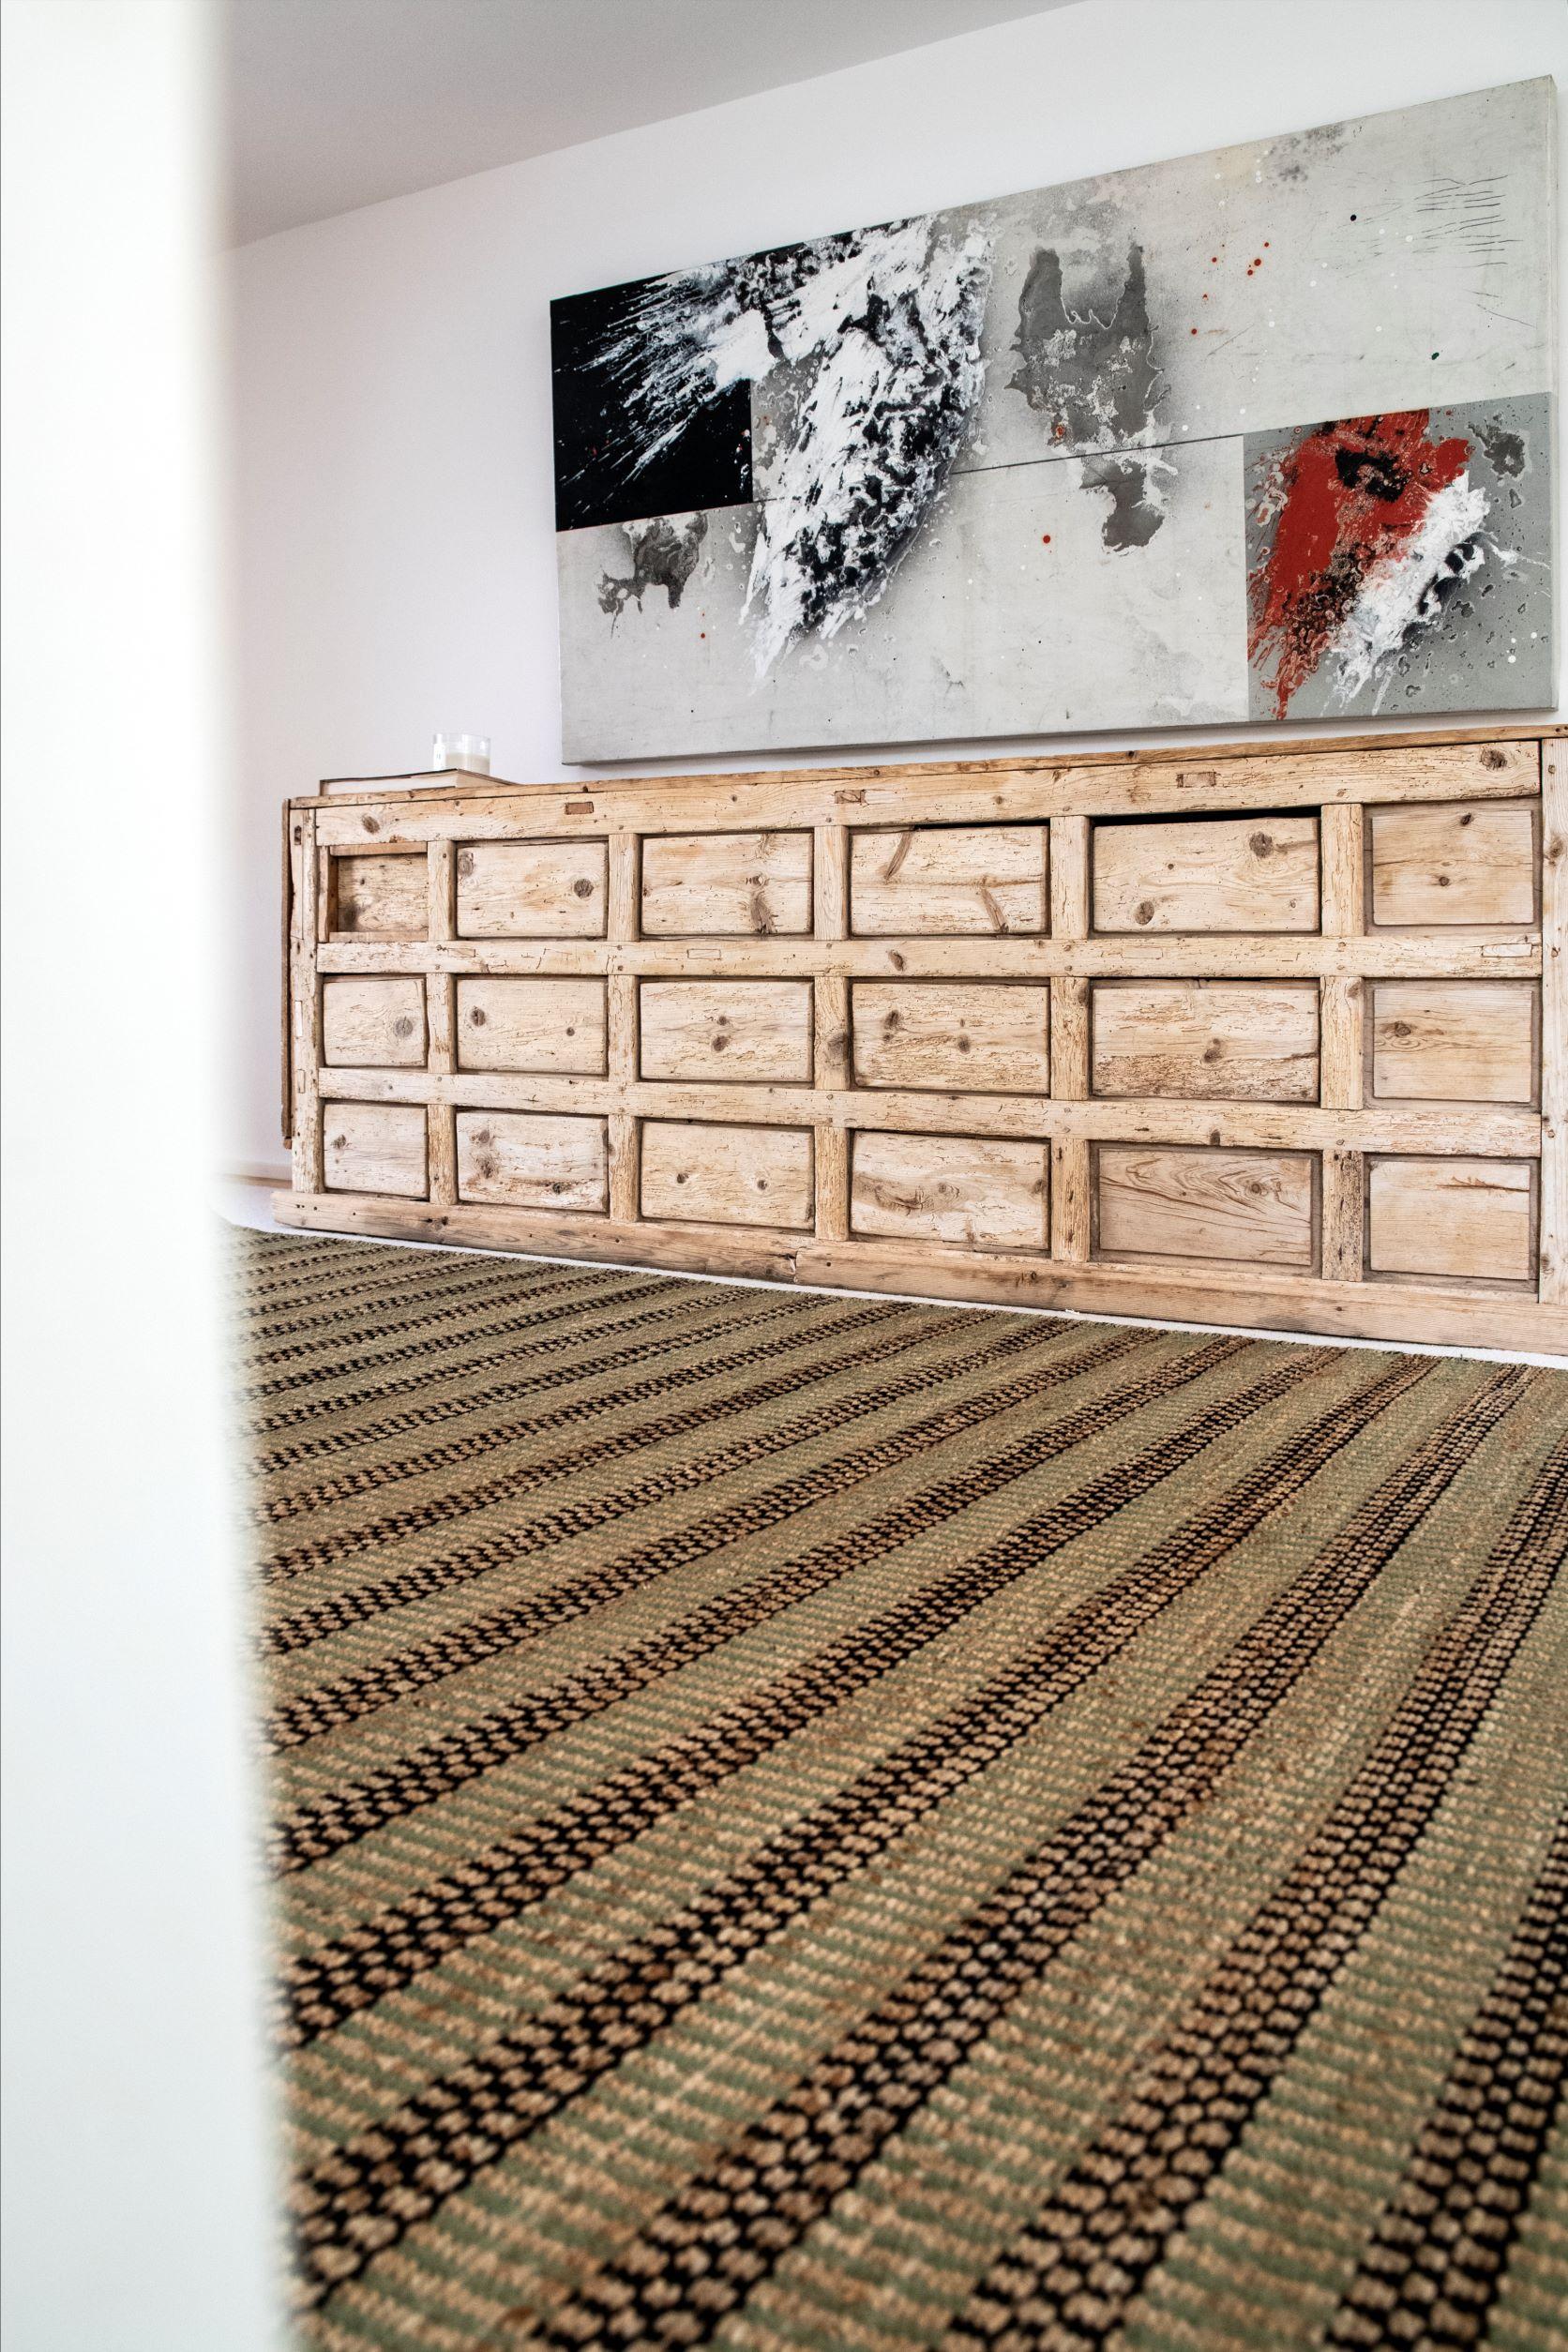 This jute rug has been ethically hand woven in the finest jute yarns by artisans in Northern India, using a traditional weaving technique of this area.
Each rug is handwoven with irregular details to create beautiful imperfections that make each rug